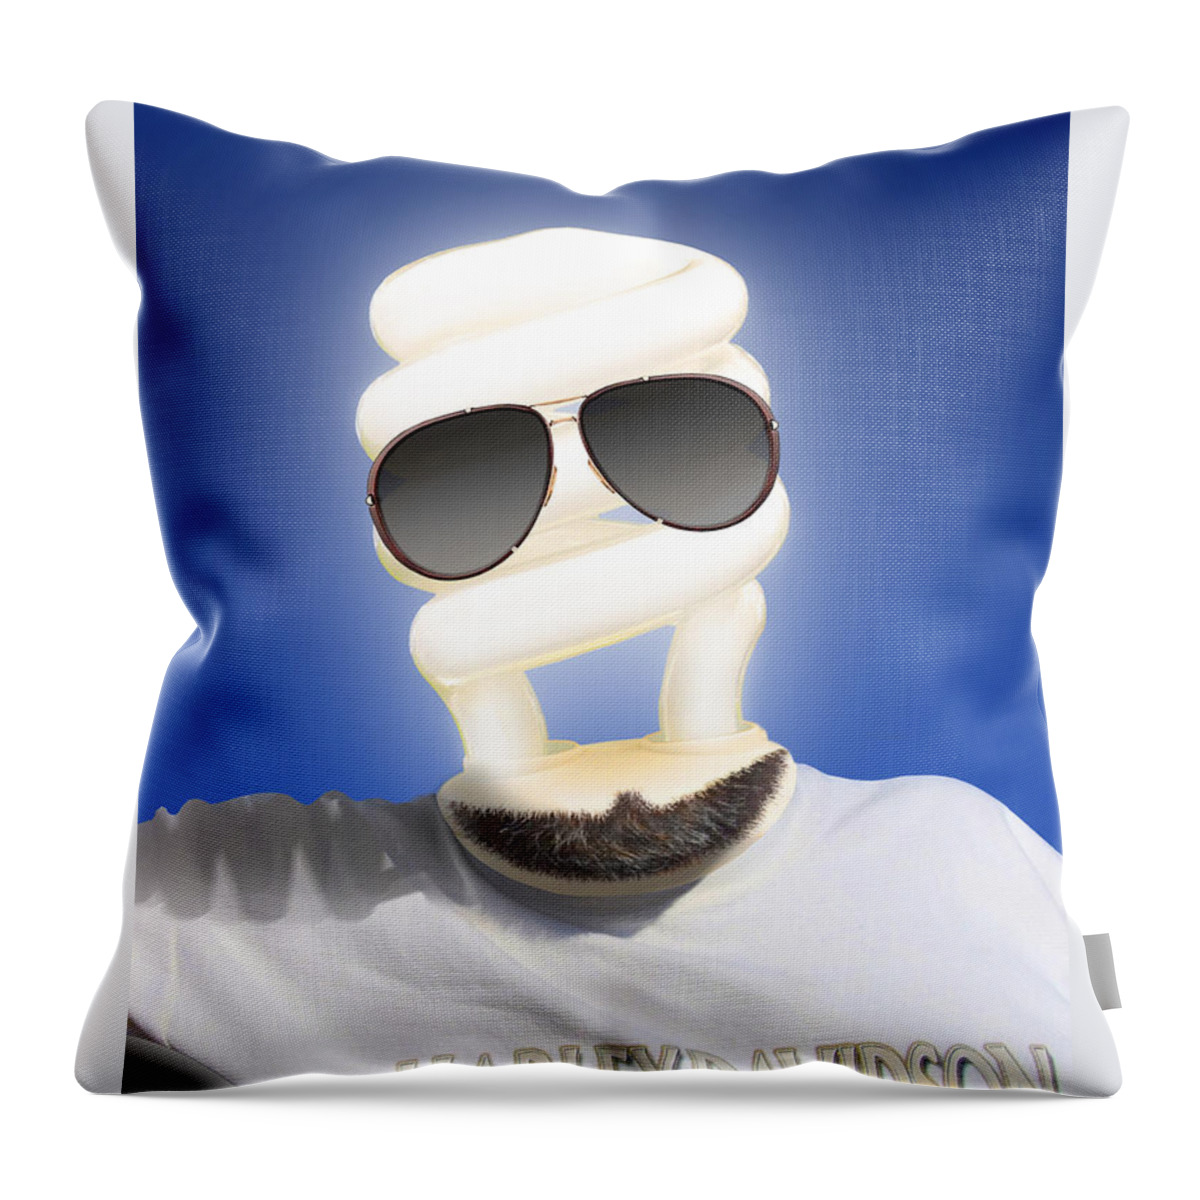 Imaginative Throw Pillow featuring the photograph Brighter Days by Mike McGlothlen